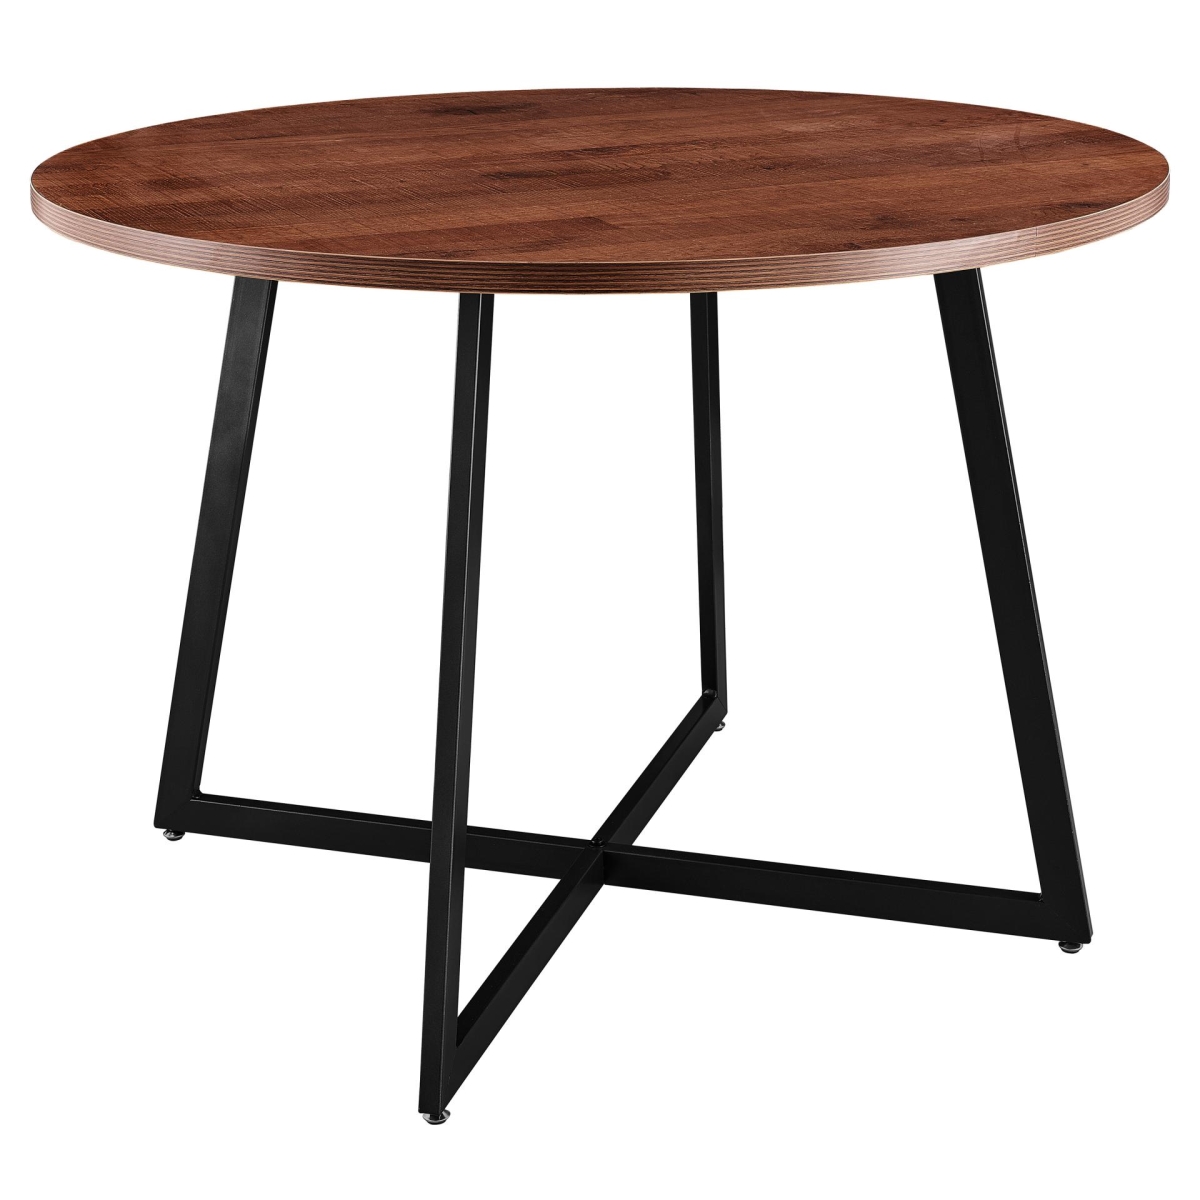 9300080-546 42 In. Courtdale Kd Round Table, Gliese Brown